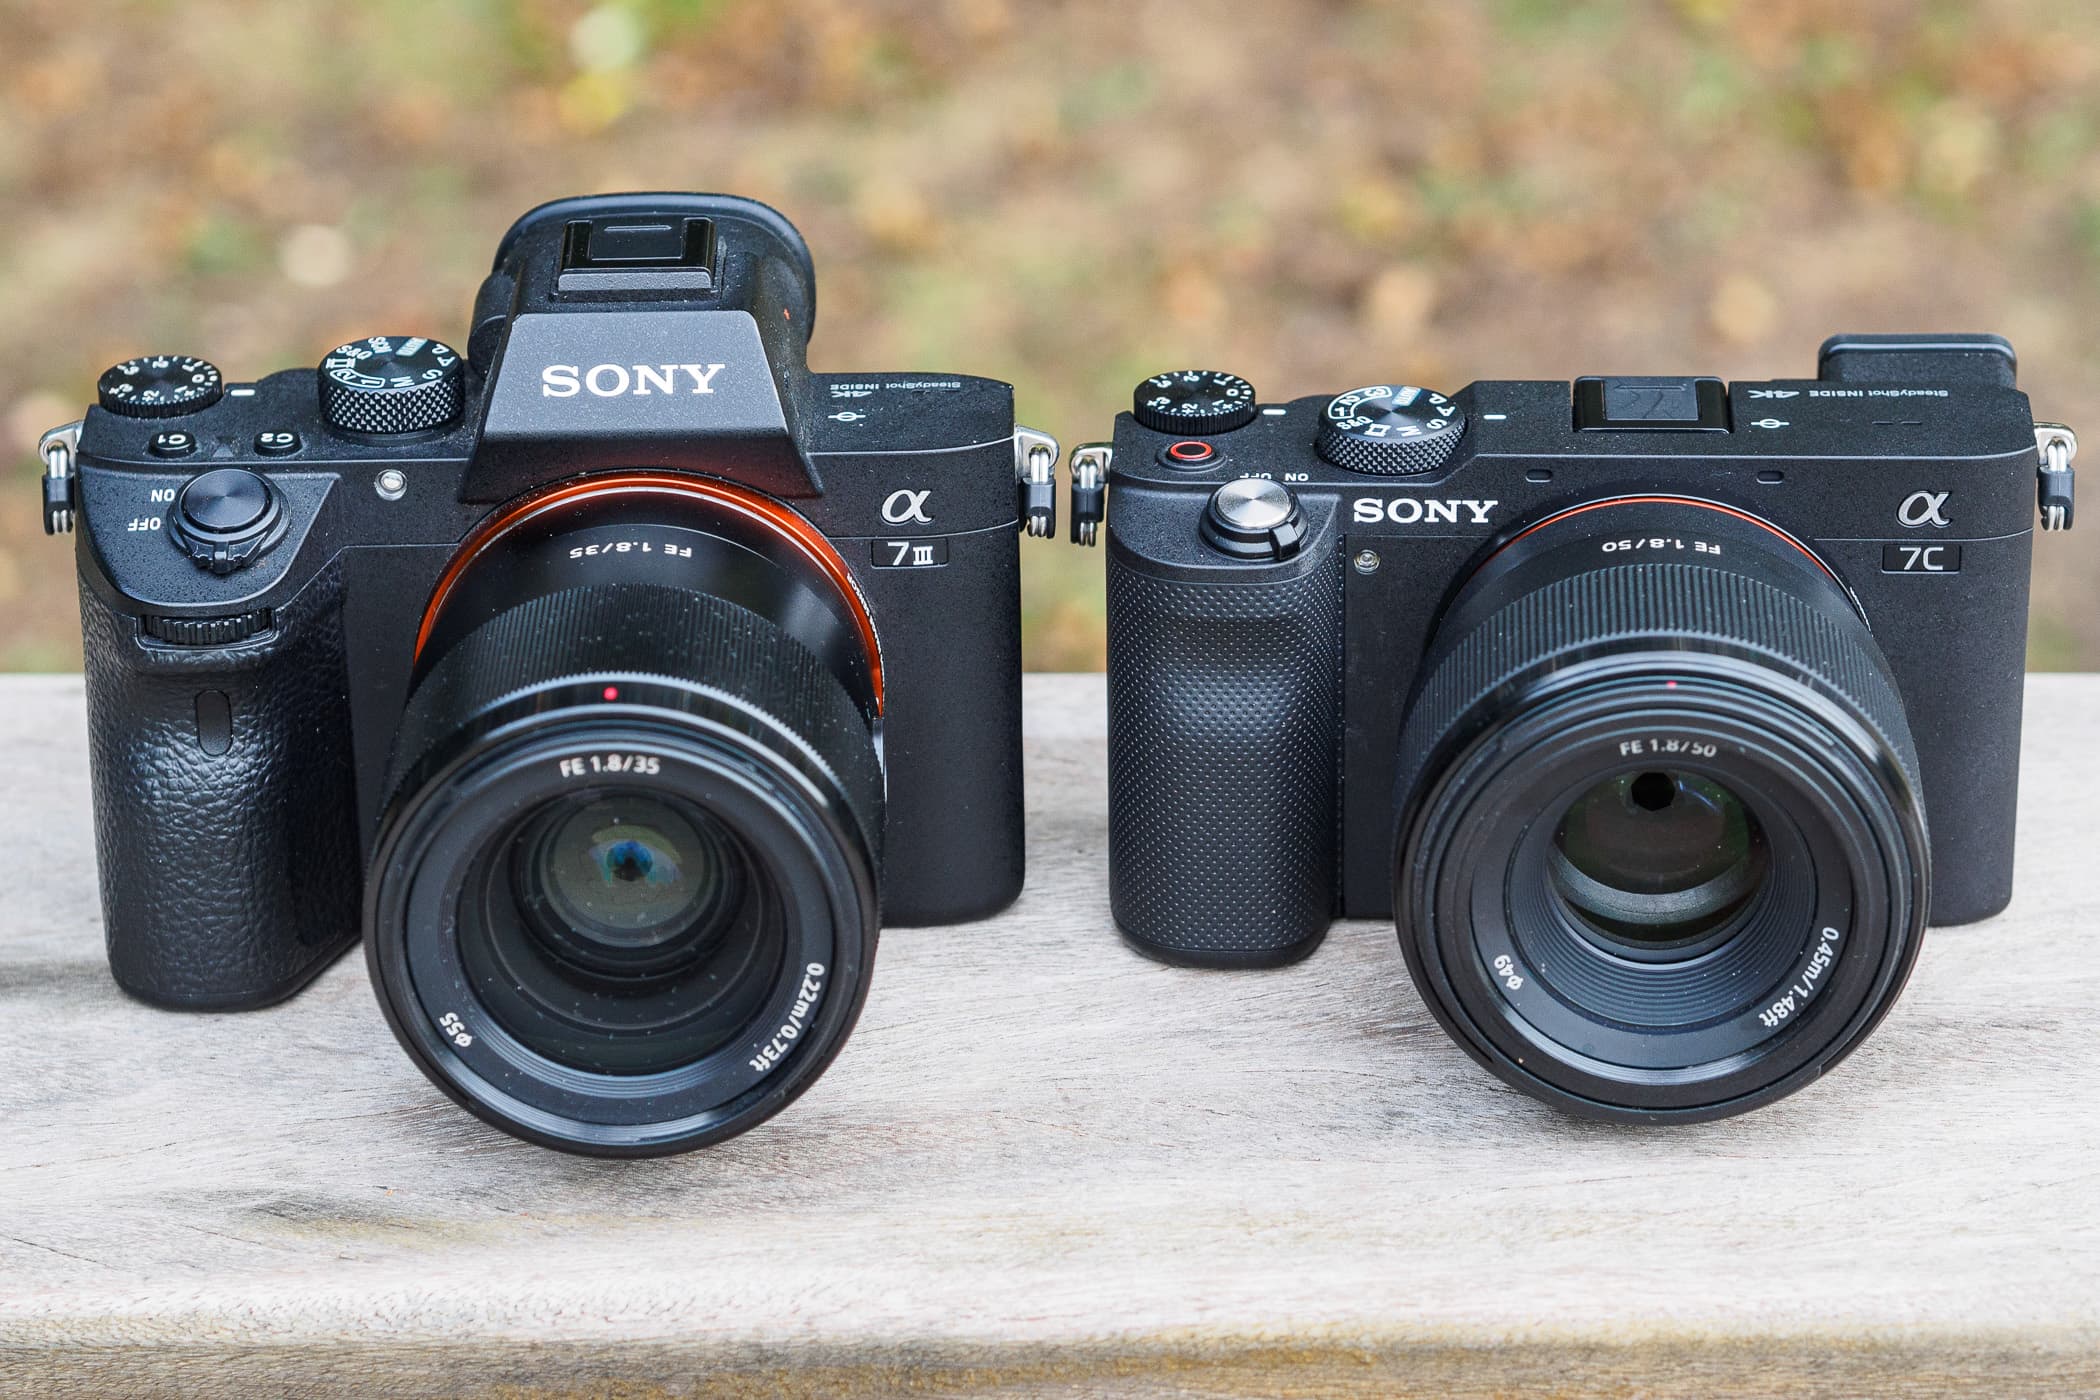 What are the Differences Between the Sony a7C and a7 III?